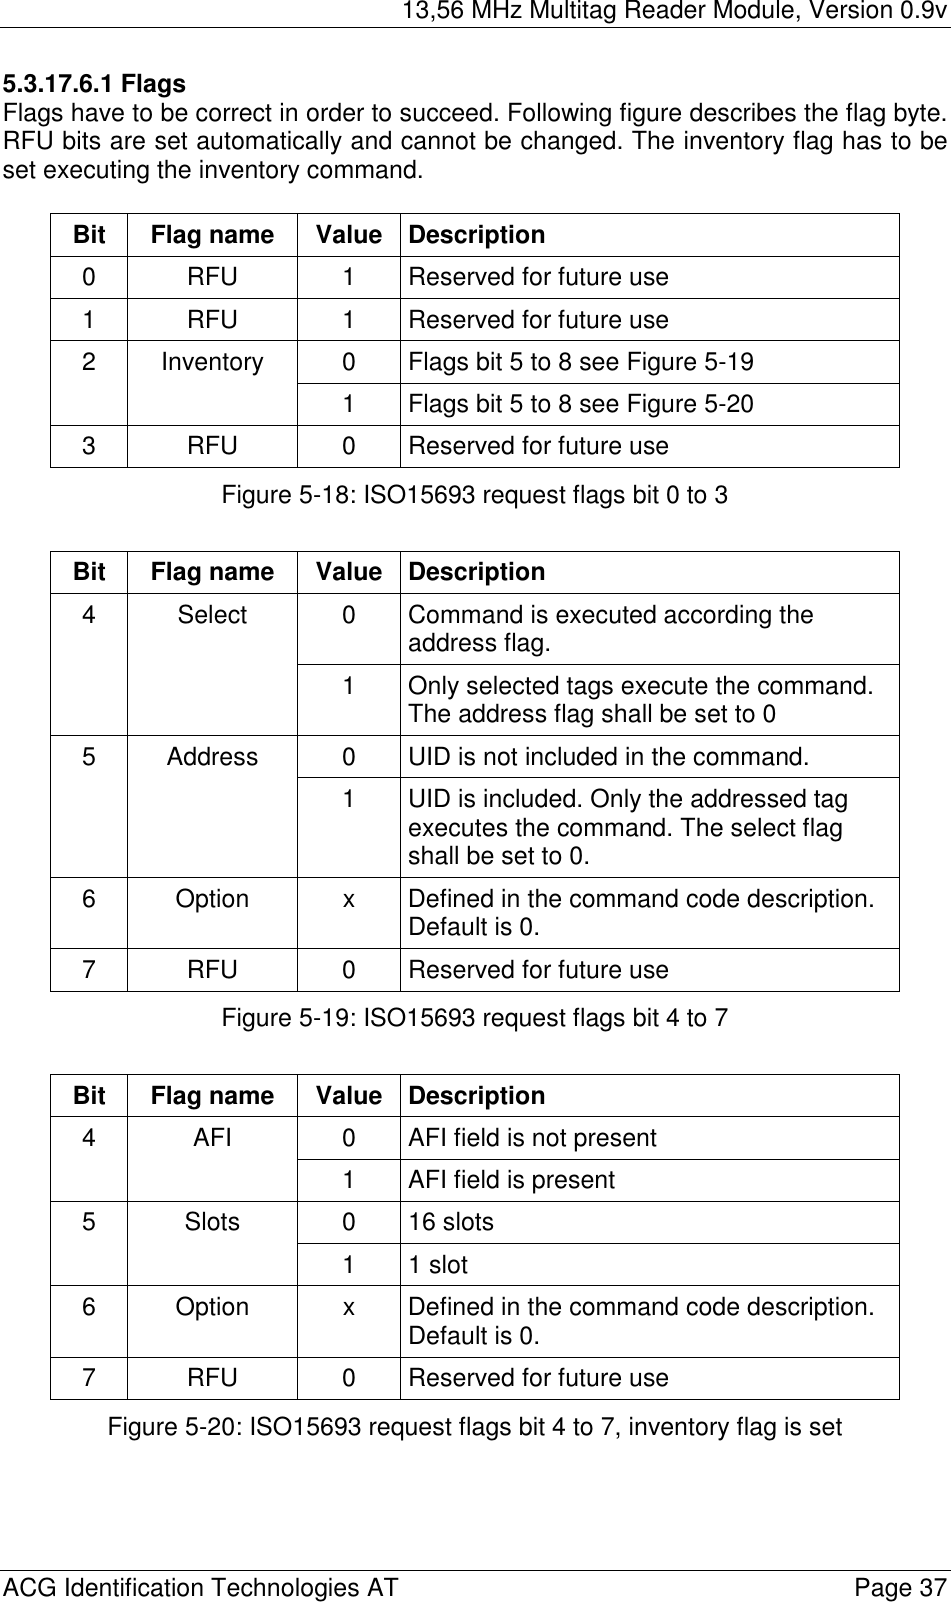 13,56 MHz Multitag Reader Module, Version 0.9v  ACG Identification Technologies AT    Page 37 5.3.17.6.1 Flags Flags have to be correct in order to succeed. Following figure describes the flag byte. RFU bits are set automatically and cannot be changed. The inventory flag has to be set executing the inventory command.  Bit Flag name Value Description 0  RFU  1  Reserved for future use 1  RFU  1  Reserved for future use 0  Flags bit 5 to 8 see Figure 5-19 2 Inventory 1  Flags bit 5 to 8 see Figure 5-20 3  RFU  0  Reserved for future use Figure 5-18: ISO15693 request flags bit 0 to 3  Bit Flag name Value Description 0  Command is executed according the address flag. 4 Select 1  Only selected tags execute the command. The address flag shall be set to 0 0  UID is not included in the command. 5 Address 1  UID is included. Only the addressed tag executes the command. The select flag shall be set to 0. 6  Option  x  Defined in the command code description. Default is 0. 7  RFU  0  Reserved for future use Figure 5-19: ISO15693 request flags bit 4 to 7  Bit Flag name Value Description 0  AFI field is not present 4 AFI 1  AFI field is present 0 16 slots 5 Slots 1 1 slot 6  Option  x  Defined in the command code description. Default is 0. 7  RFU  0  Reserved for future use Figure 5-20: ISO15693 request flags bit 4 to 7, inventory flag is set  